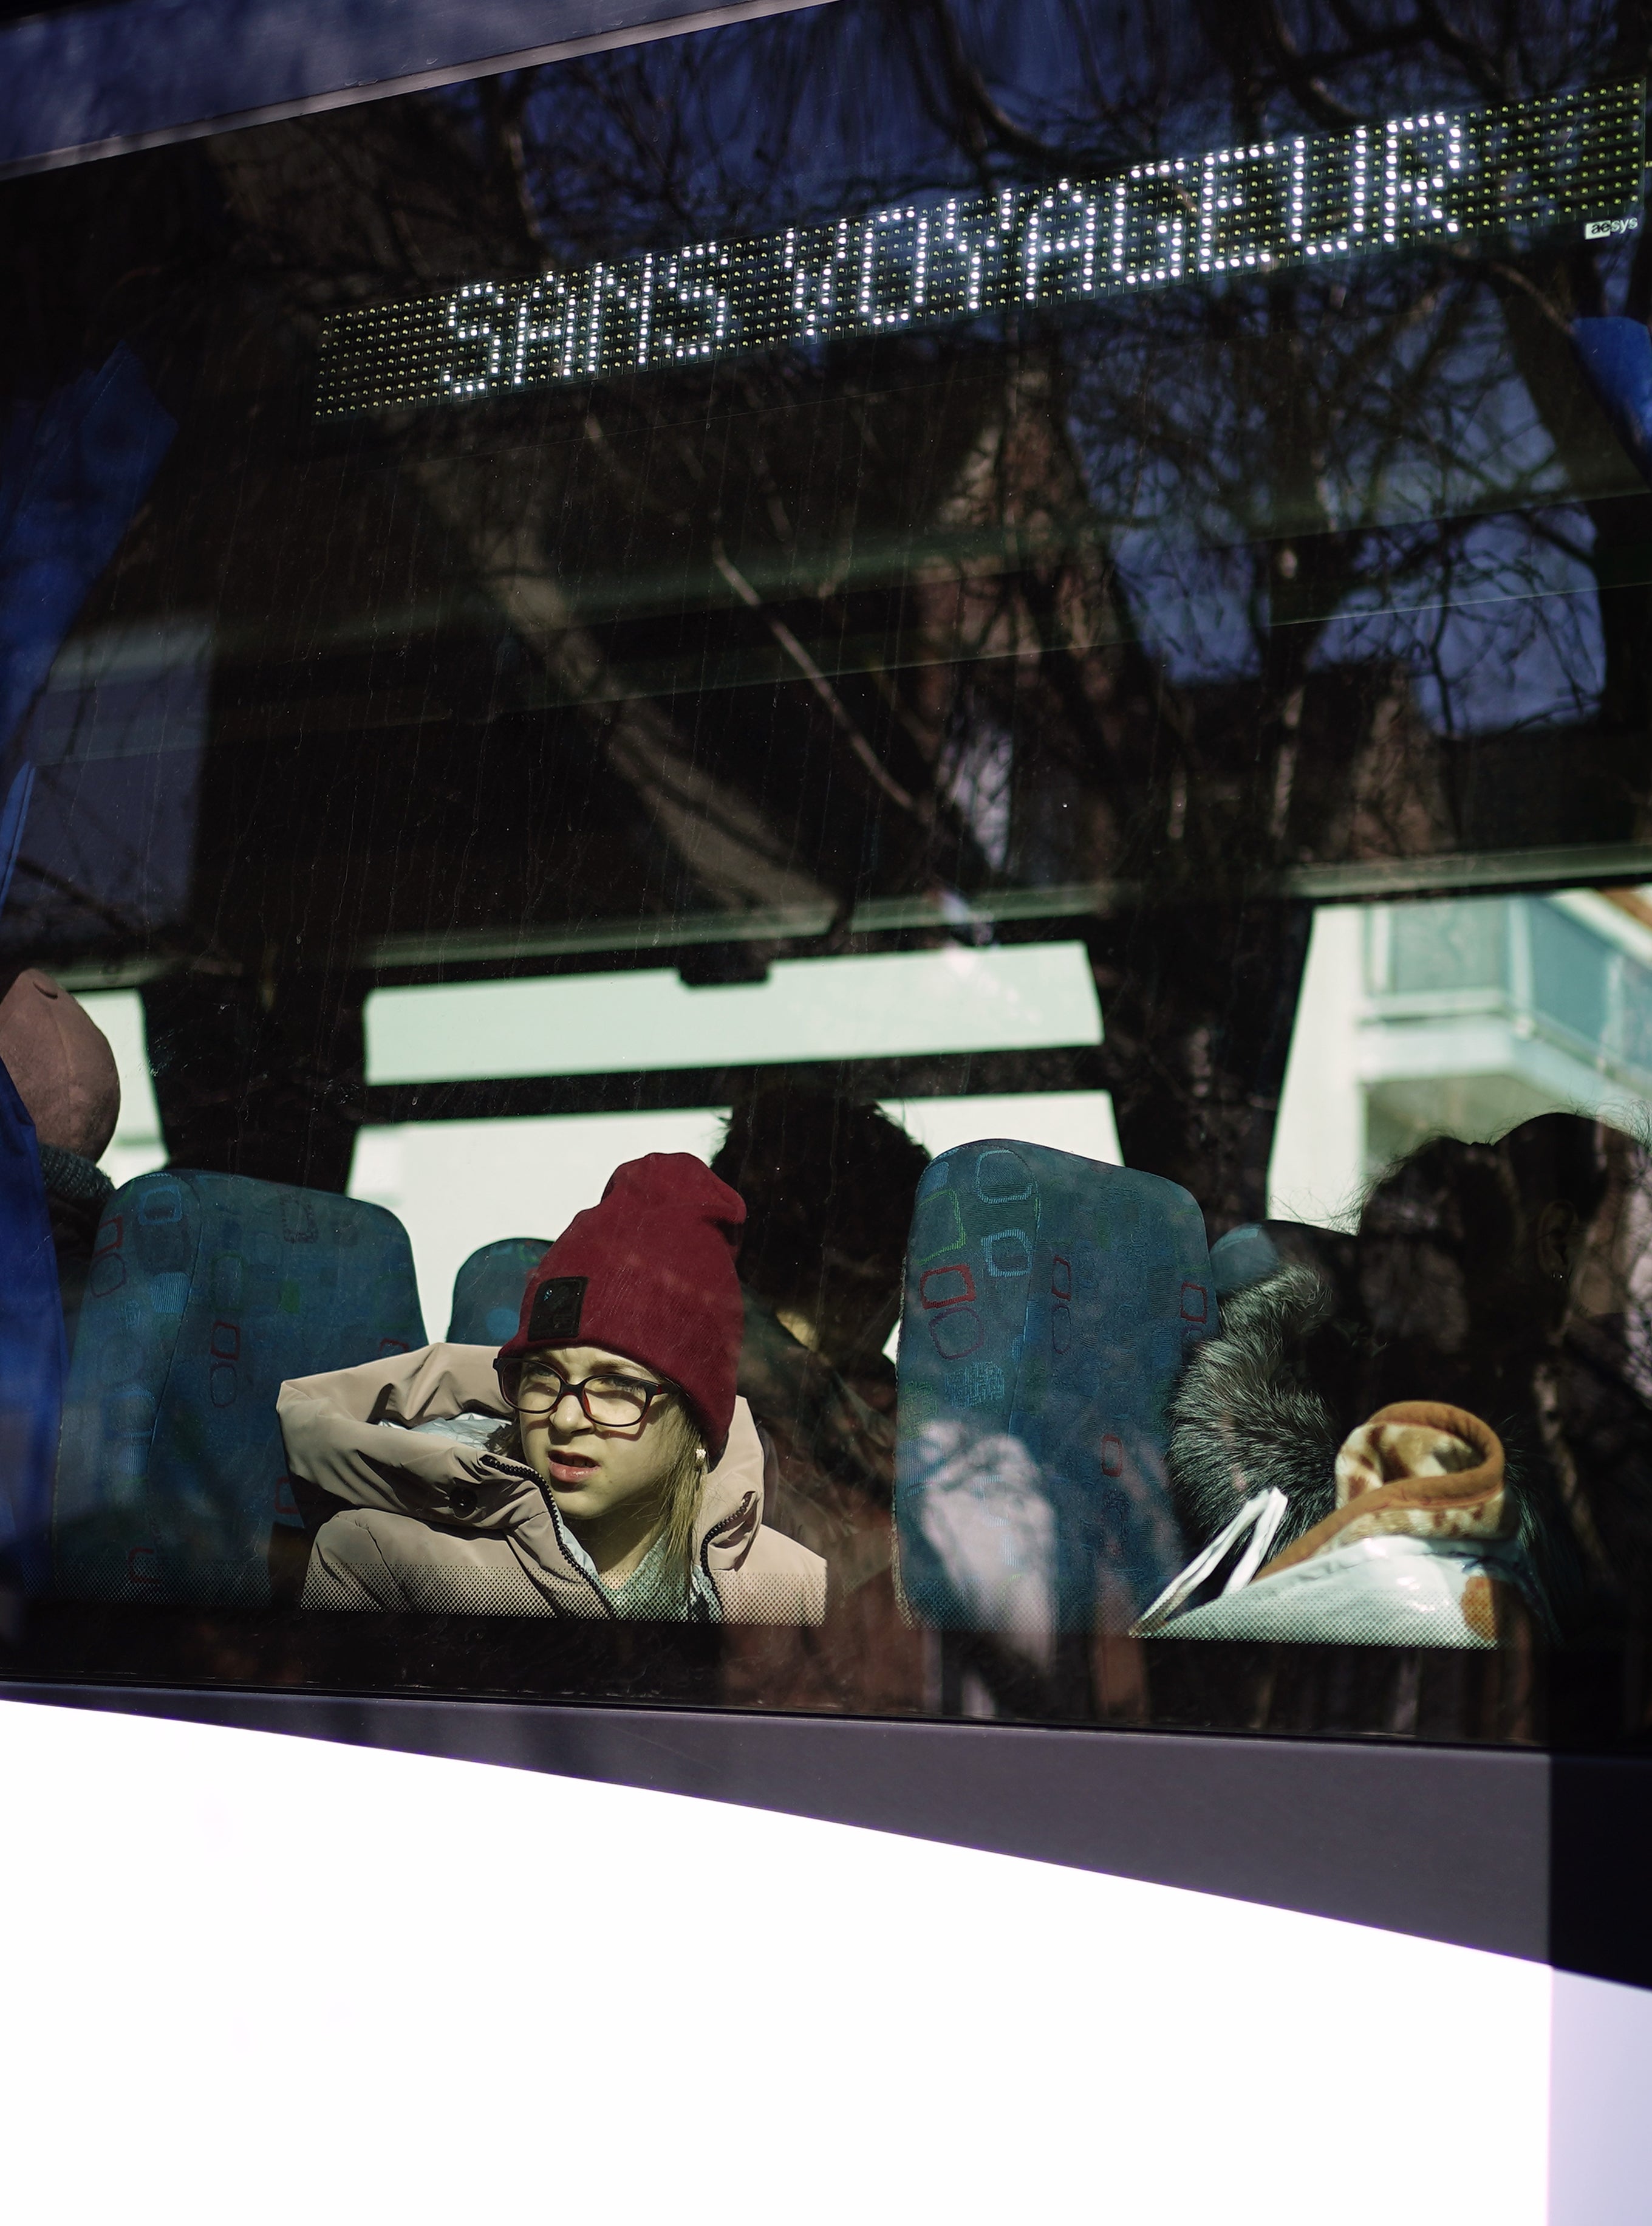 Ukrainian refugees sit on board a bus before it departs Calais (Aaron Chown/PA)